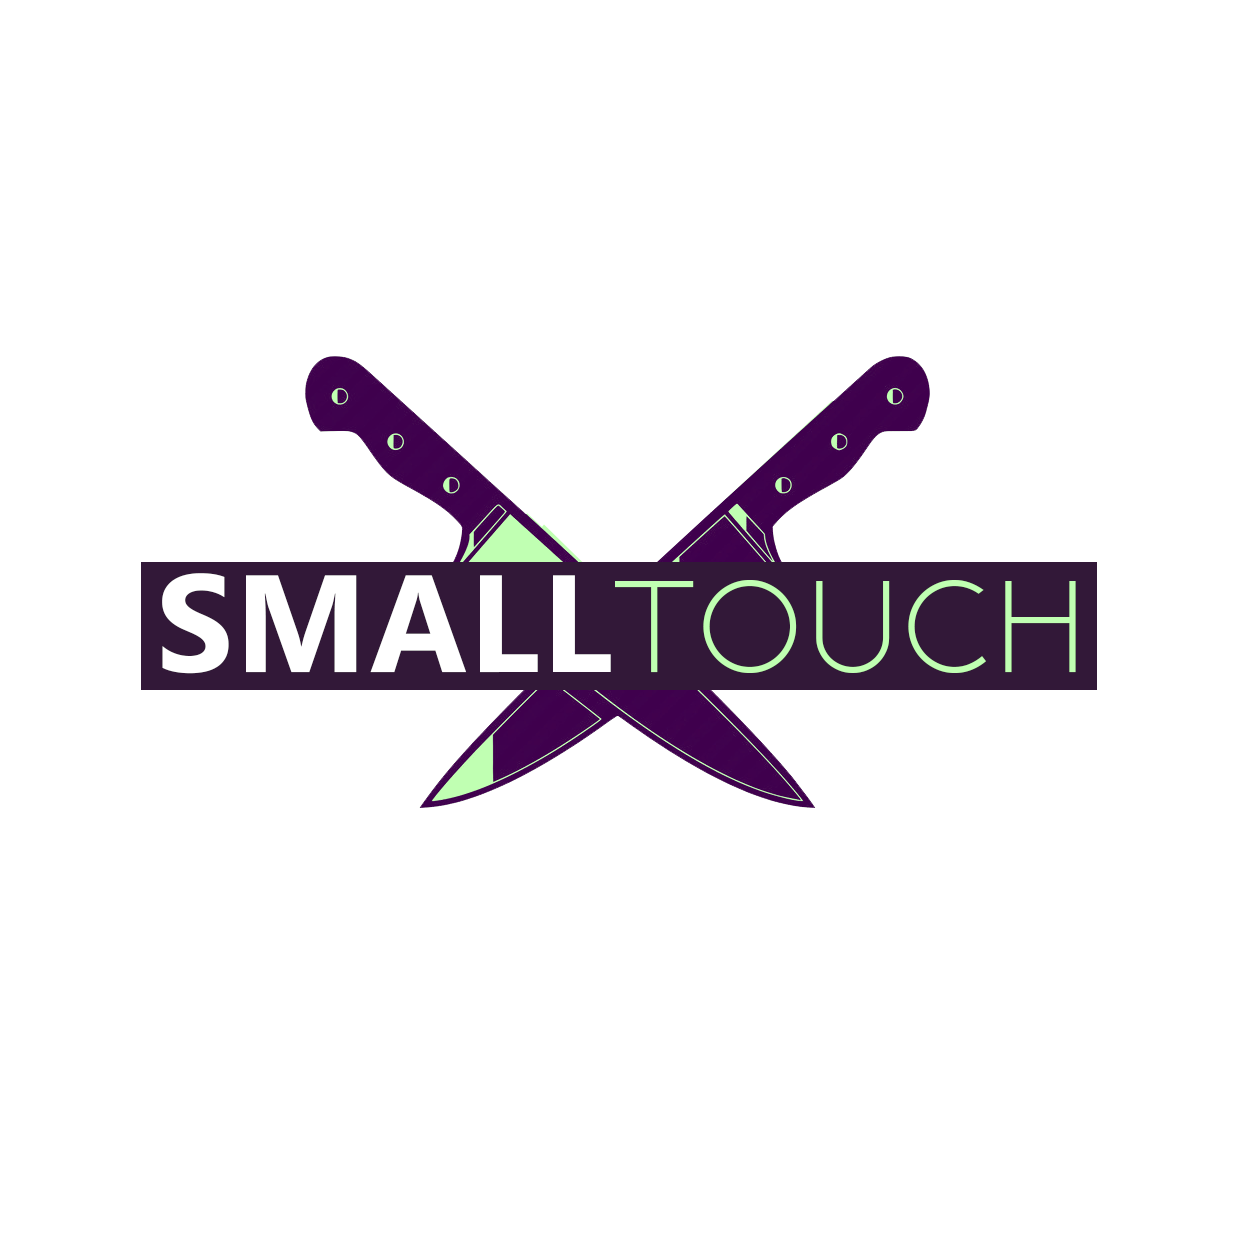 Home - The Small Touch